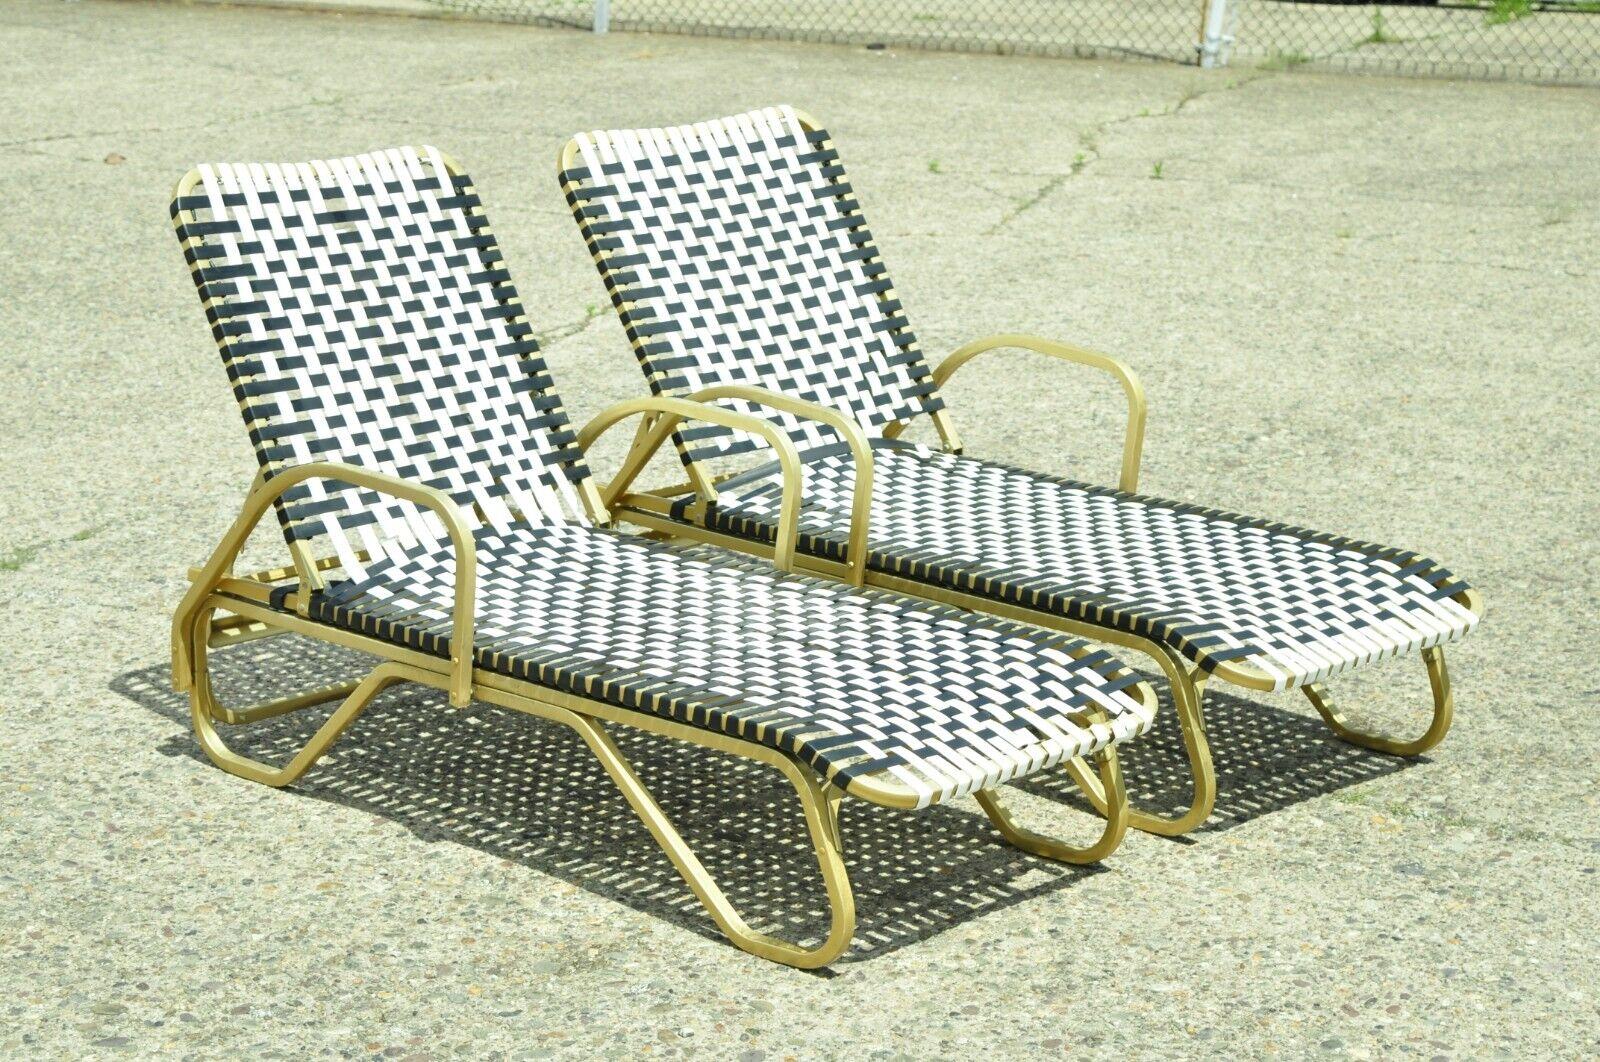 Vintage Hollywood Regency vinyl strap aluminum pool patio chaise lounge chair - a pair. Item features (2) chaise lounge chairs, adjustable frames, woven vinyl straps Aluminum metal construction with brass plated finish, clean modernist lines, great